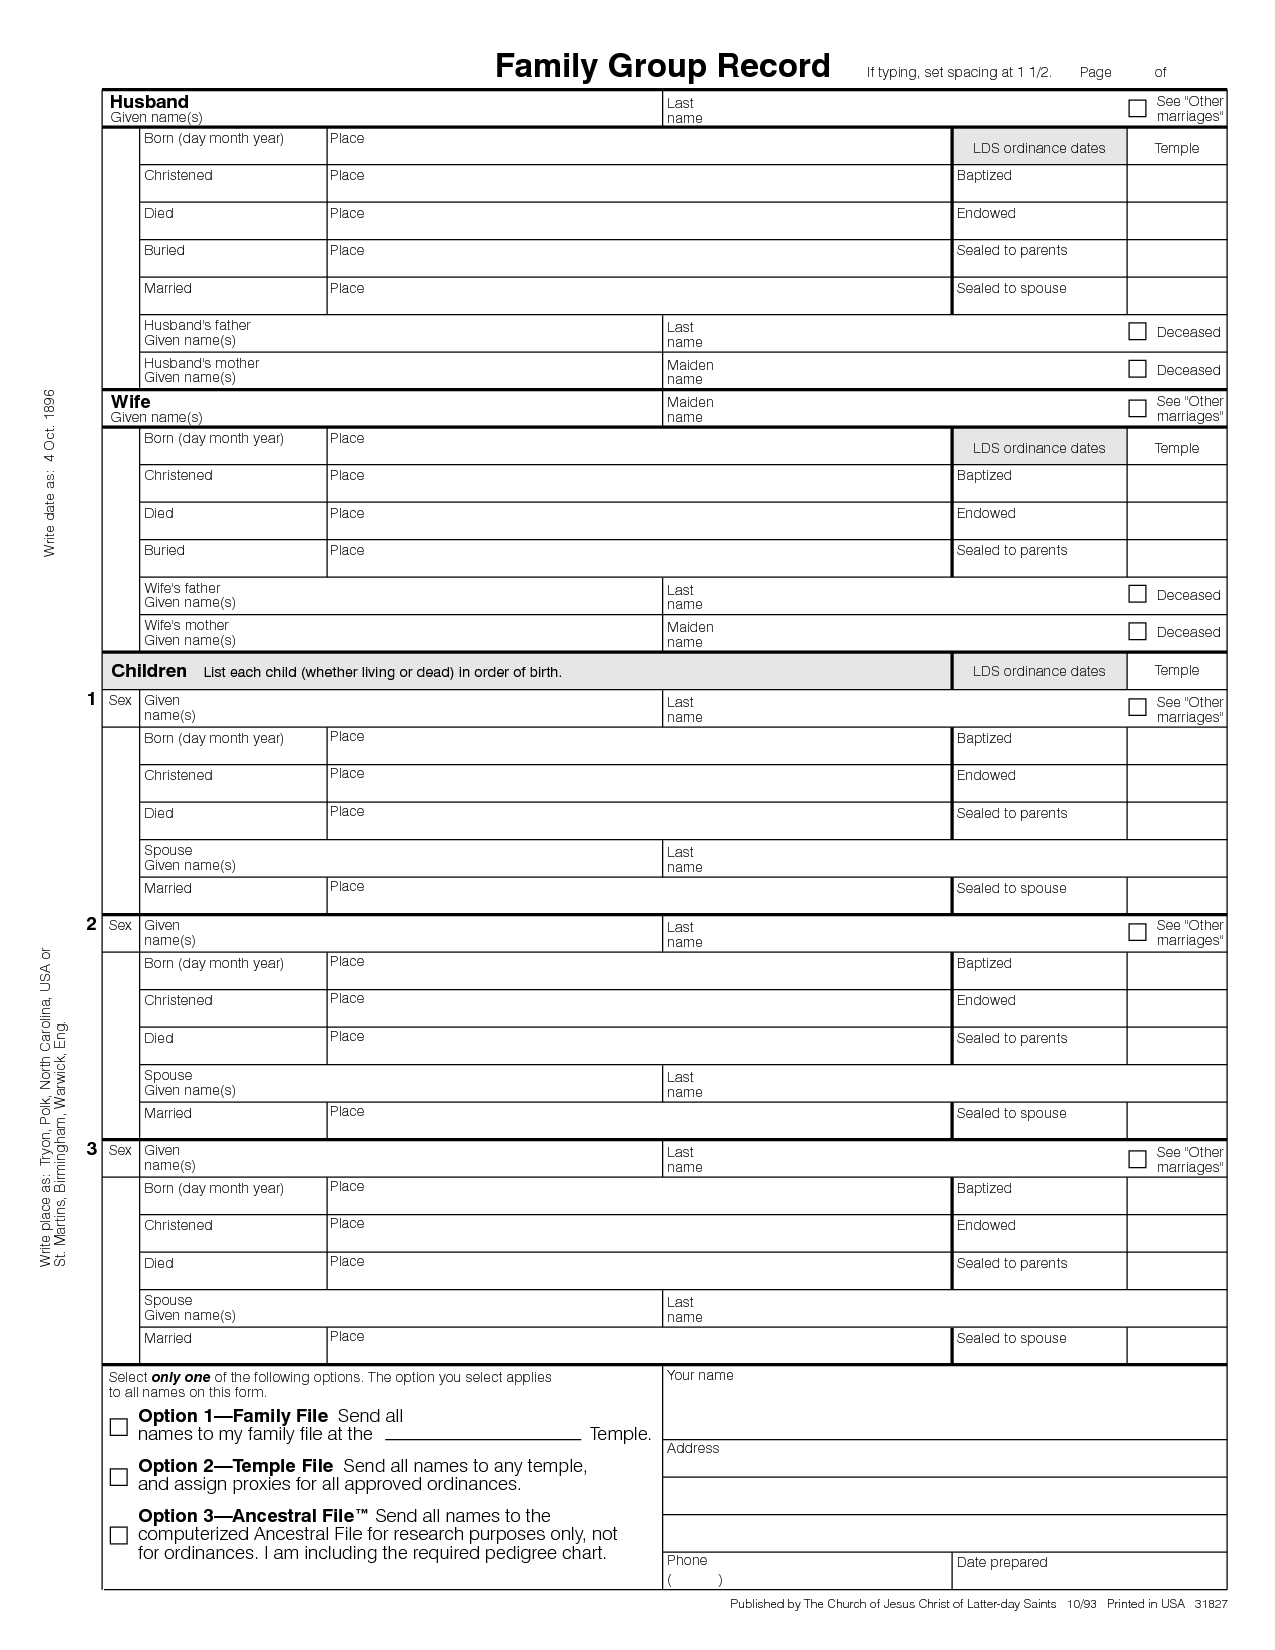 Family Group Sheets Printable | Family Group Sheet - Pdf | Facebook - Free Printable Family History Forms